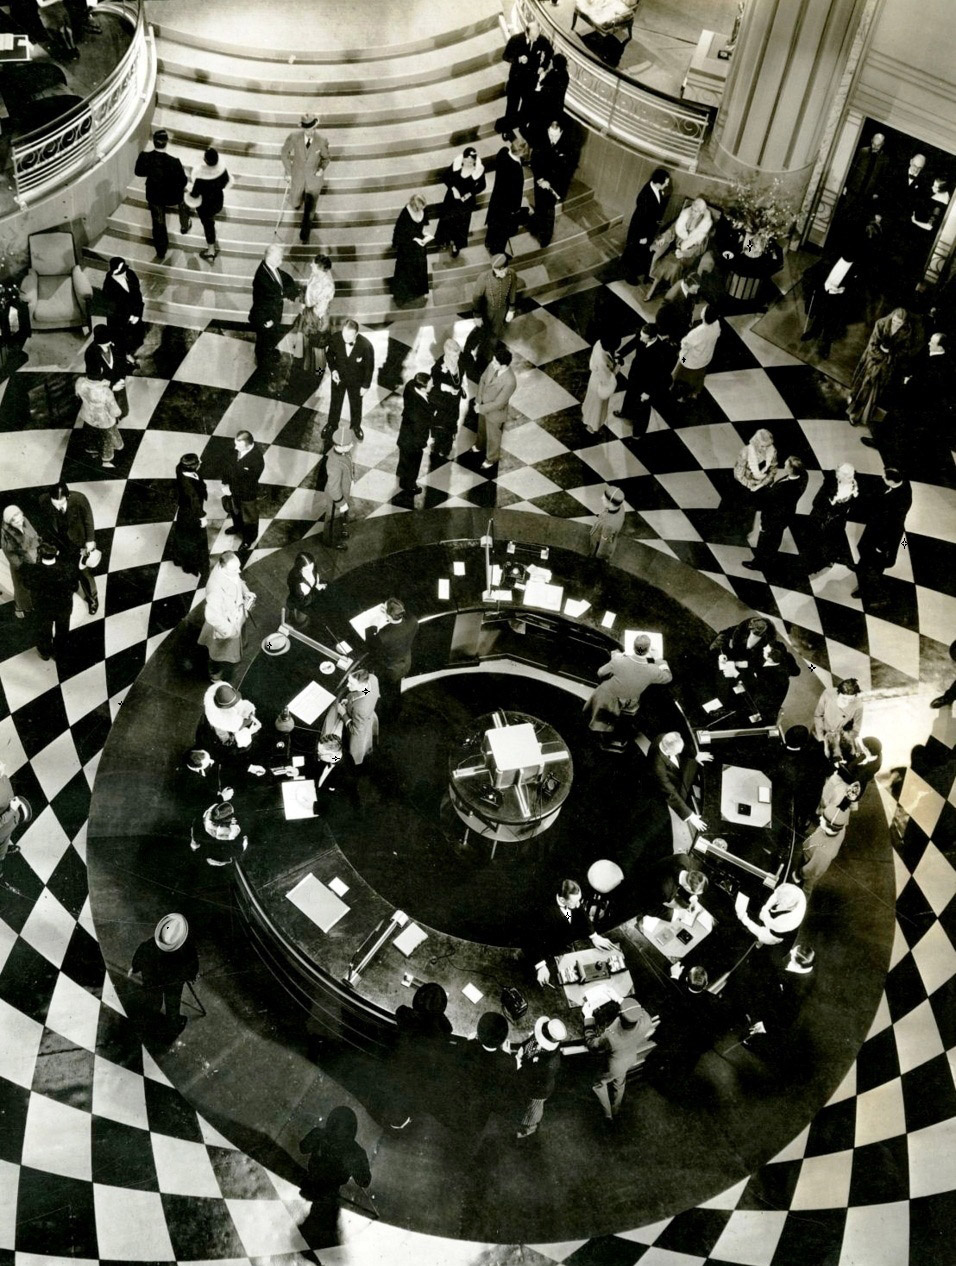 Grand Hotel lobby from Grand Hotel (1932). MGM